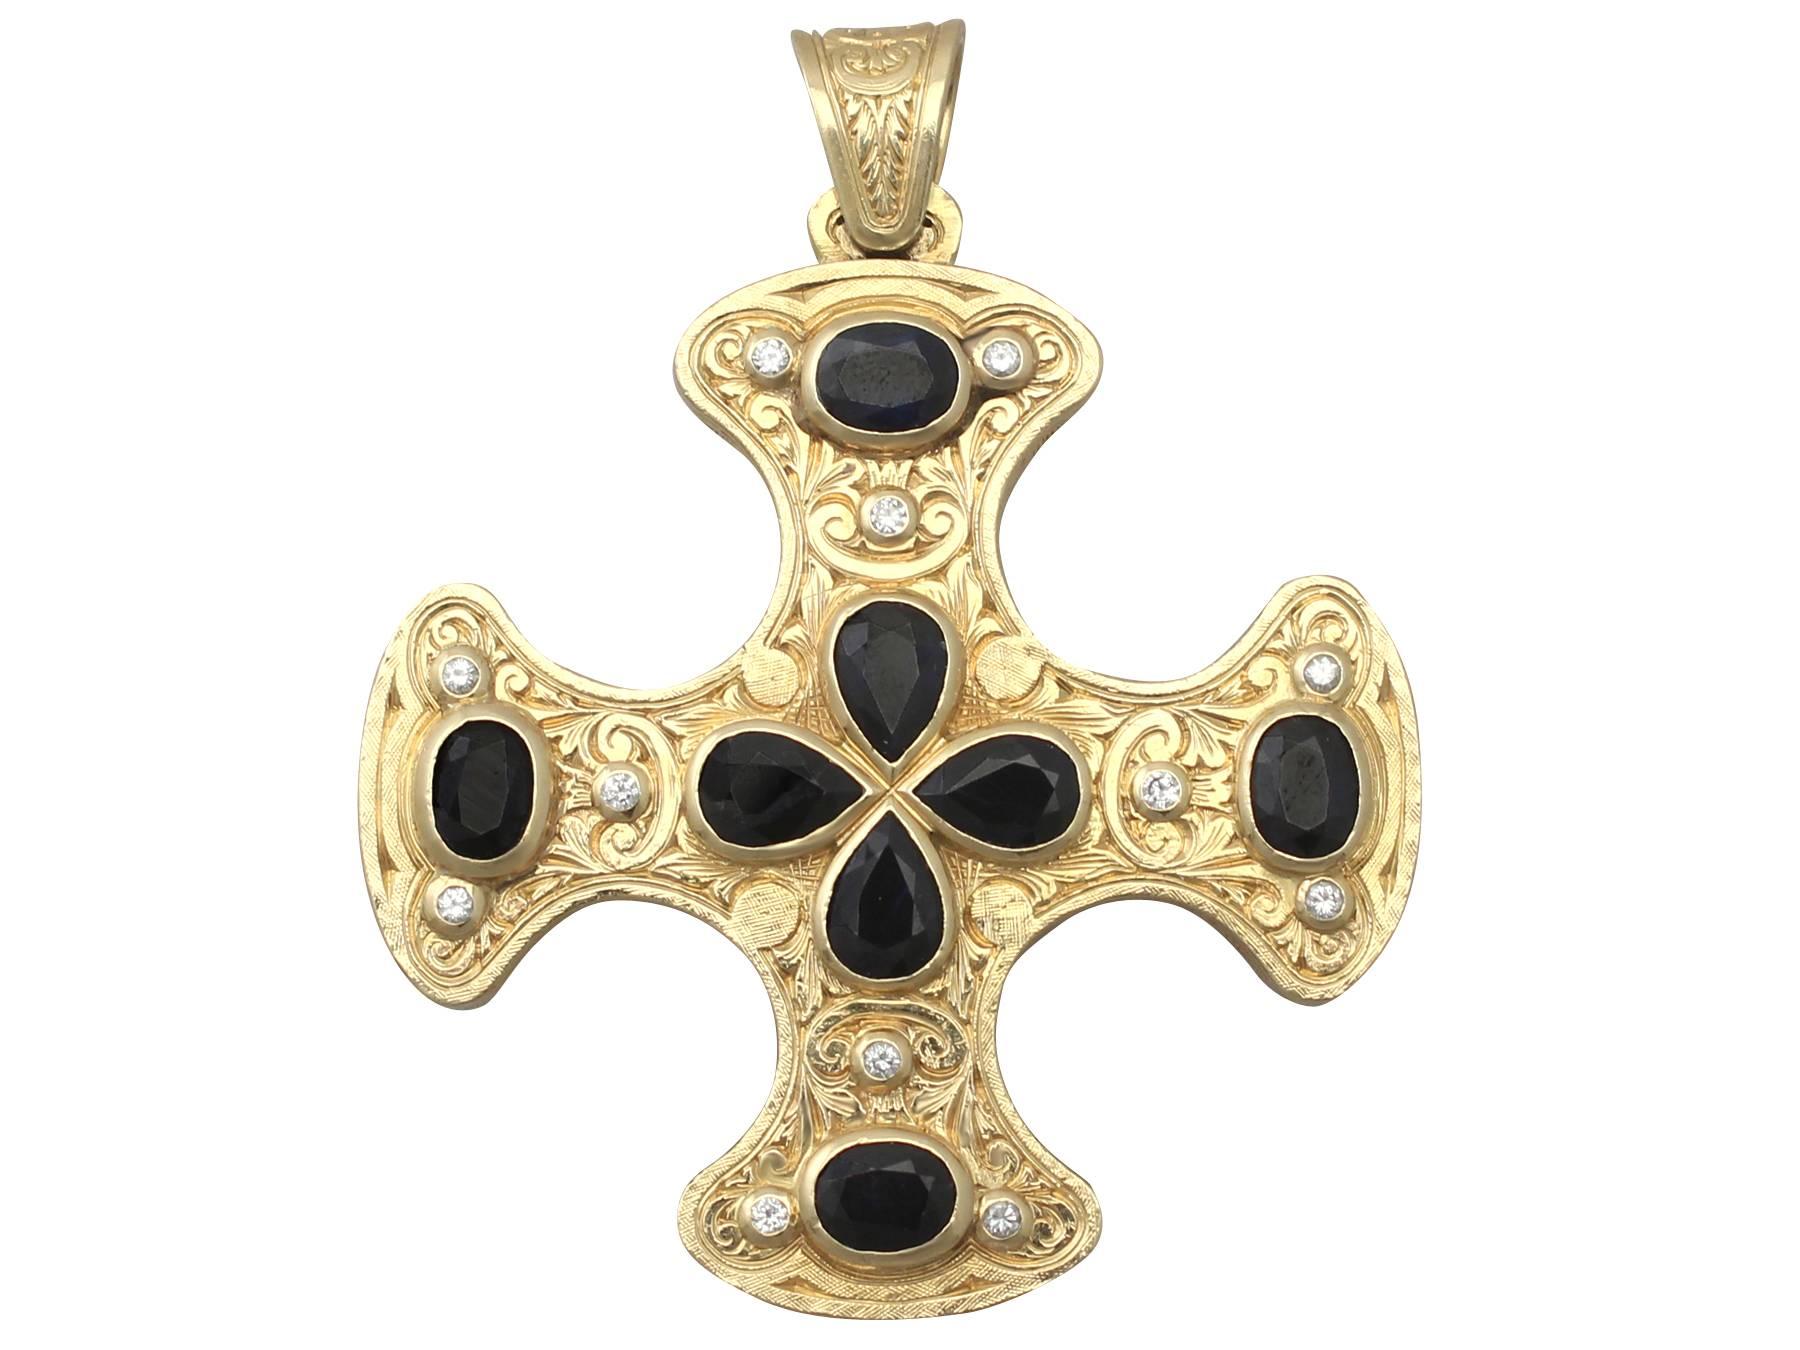 A large and impressive vintage gemstone cross pendant incorporating 12.80 carat natural sapphires, 7.85 carat natural rubies and 1.00 carat diamonds, in 18 karat yellow gold; part of our diverse vintage jewelry and estate jewelry collections

This